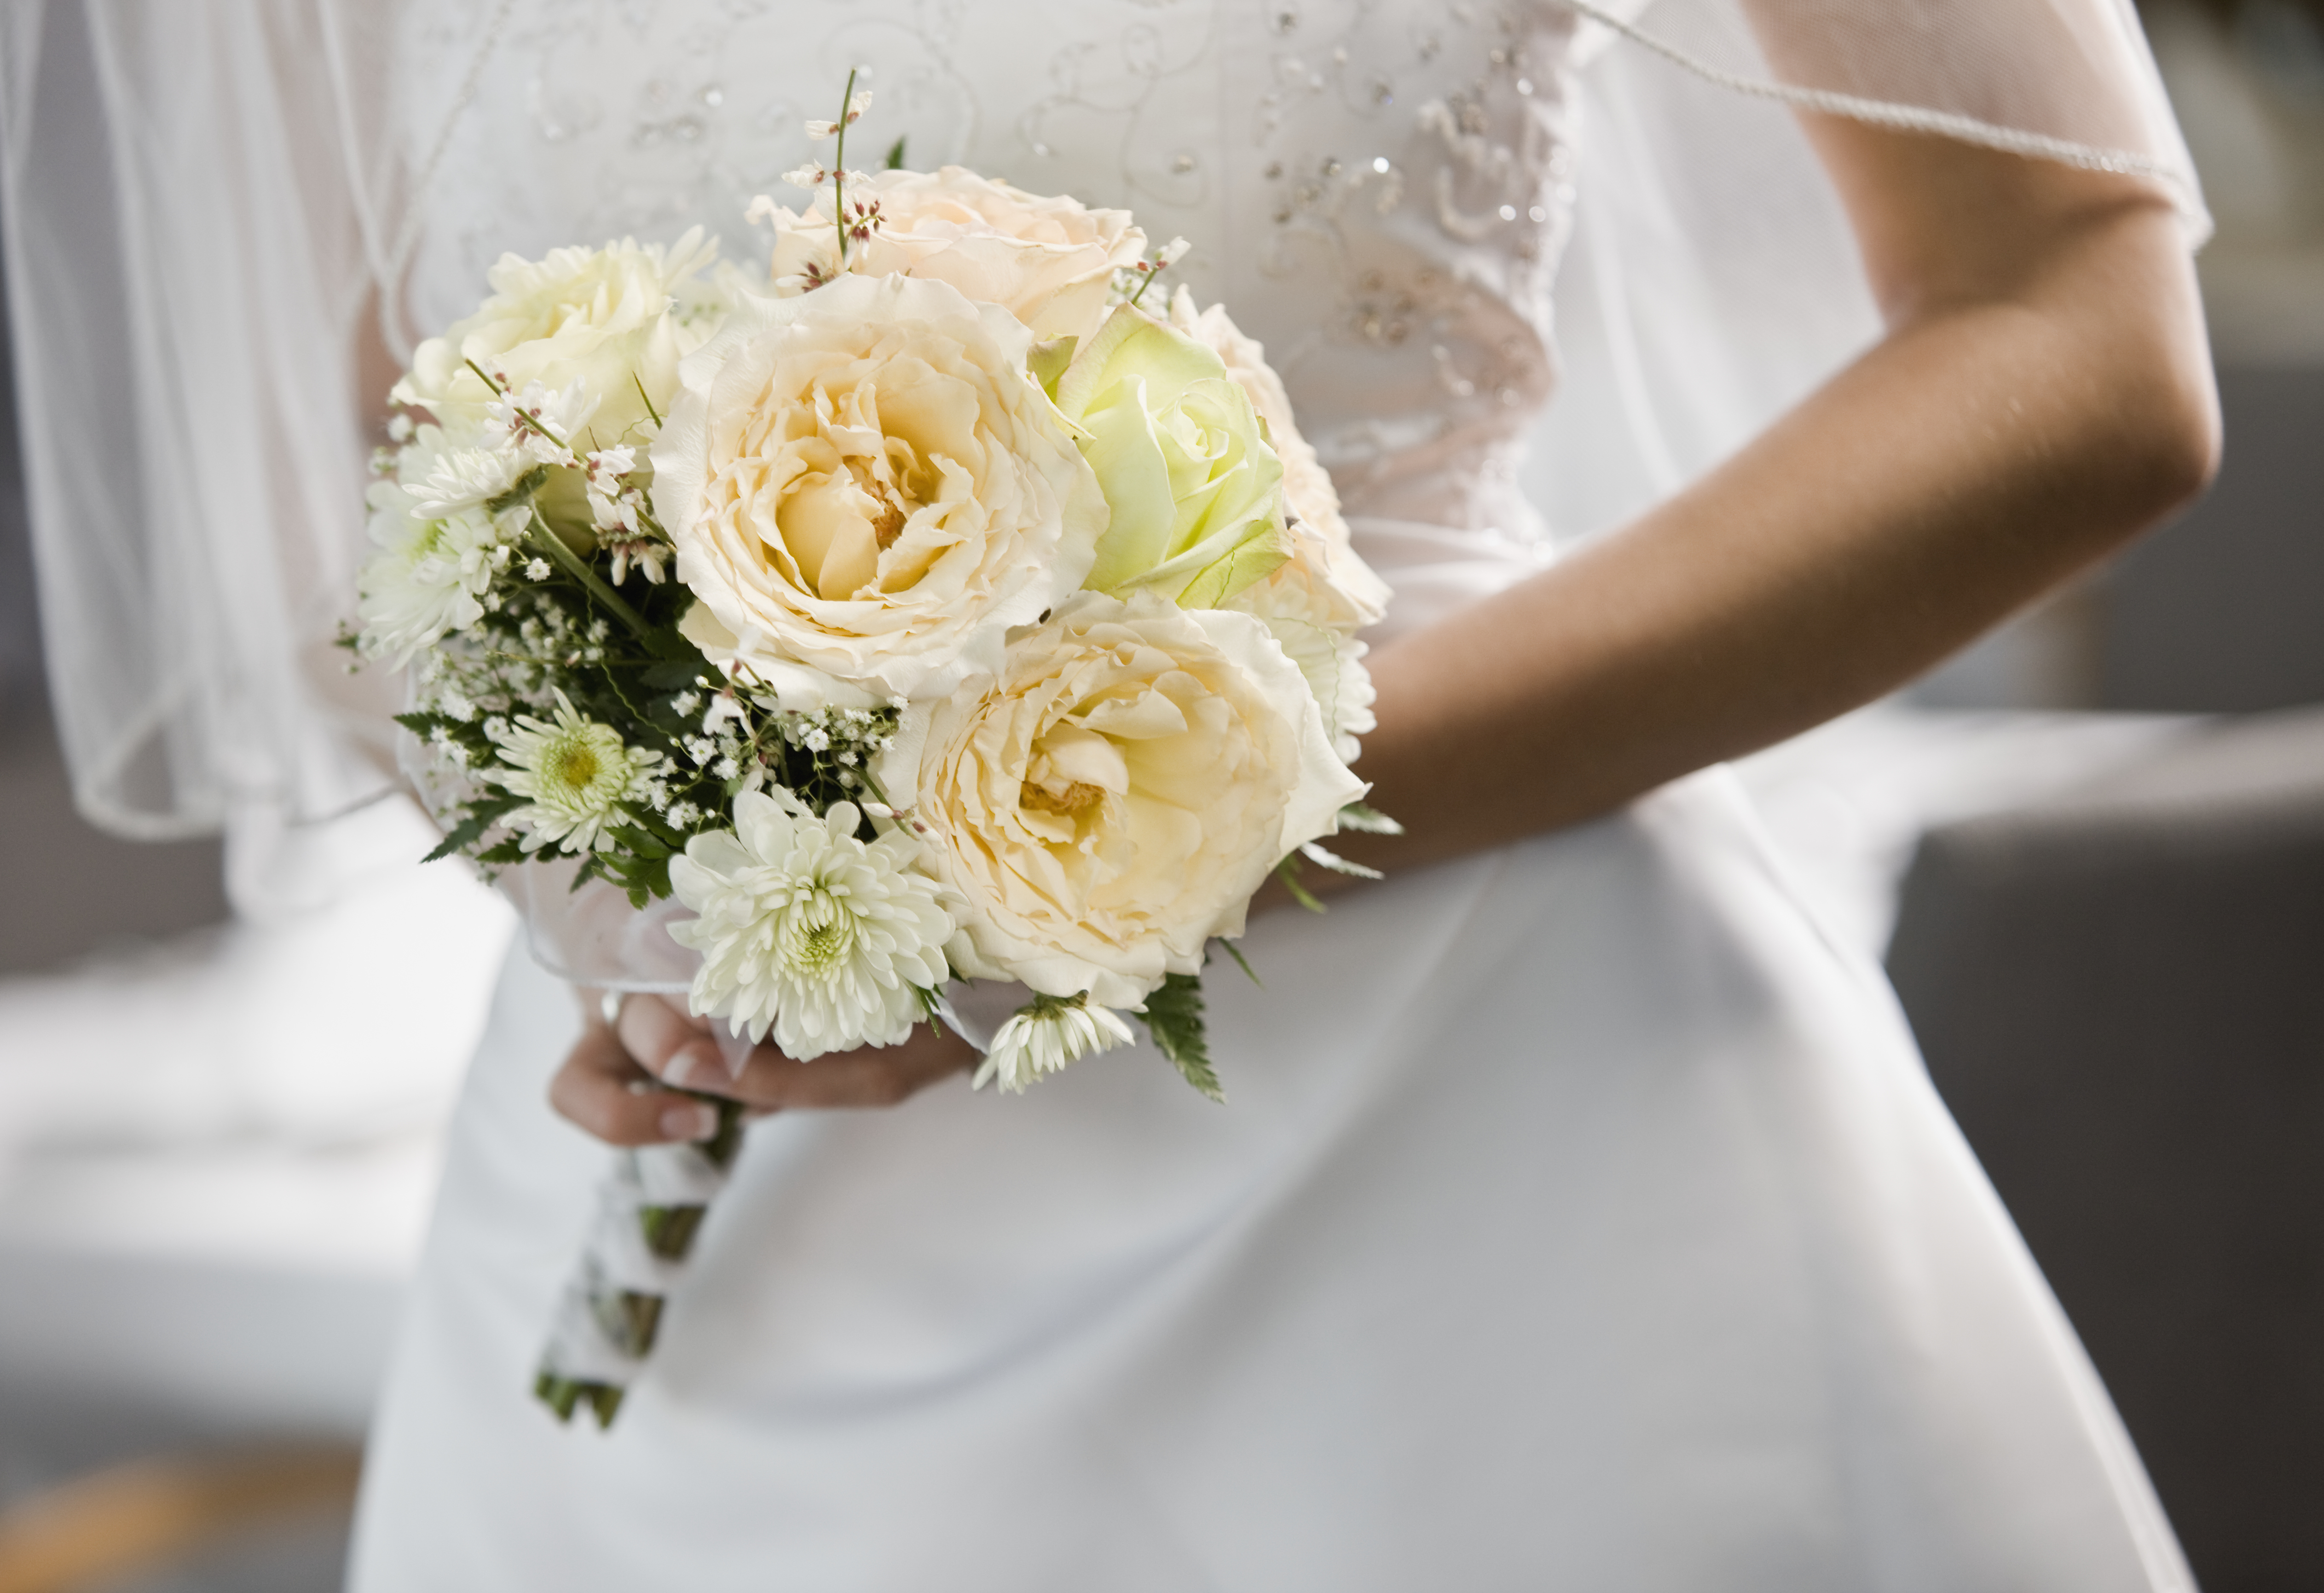 A bride holding white flowers | Source: Getty Images